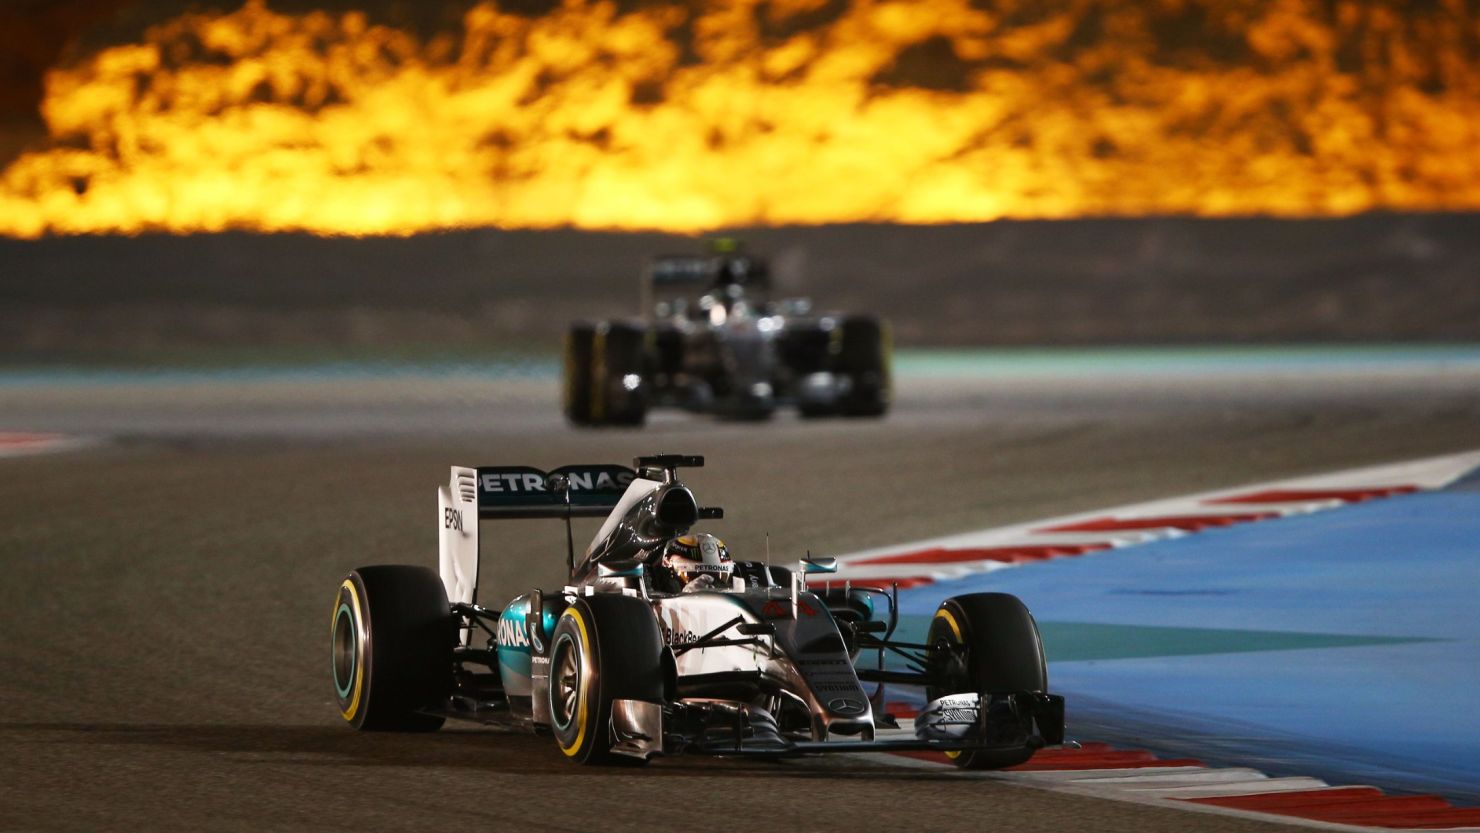 Hamilton cruised to victory in the Bahrain GP, despite losing his brakes on the final lap.